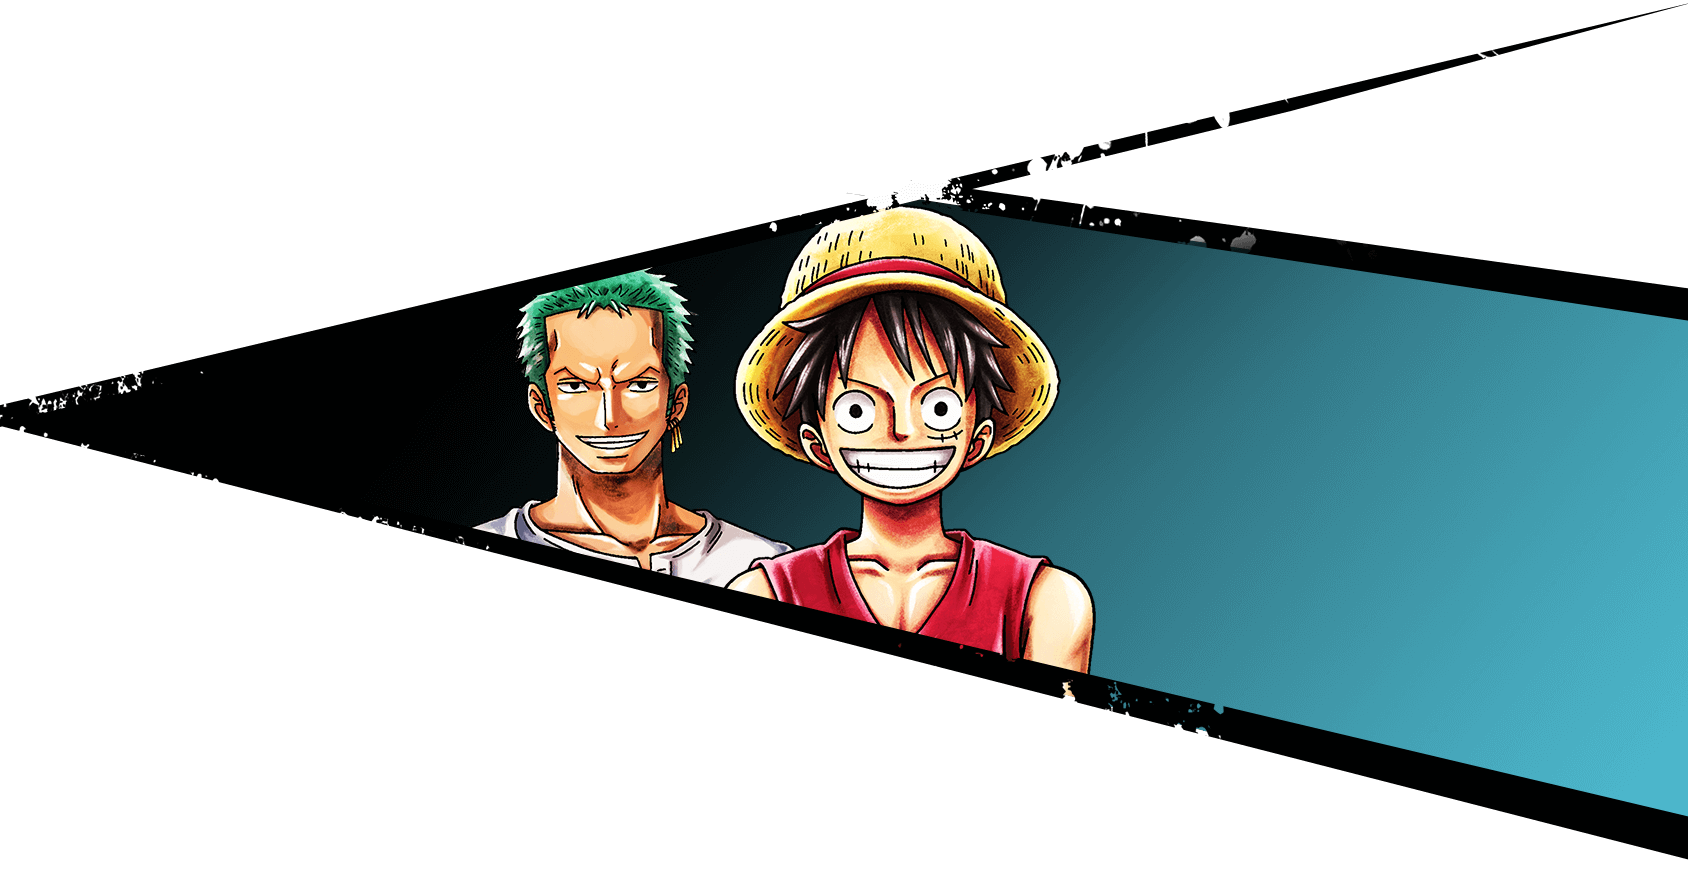 One Piece Bounty Rush 4K Wallpaper (12 variations on ) free to use!  : r/OPBR